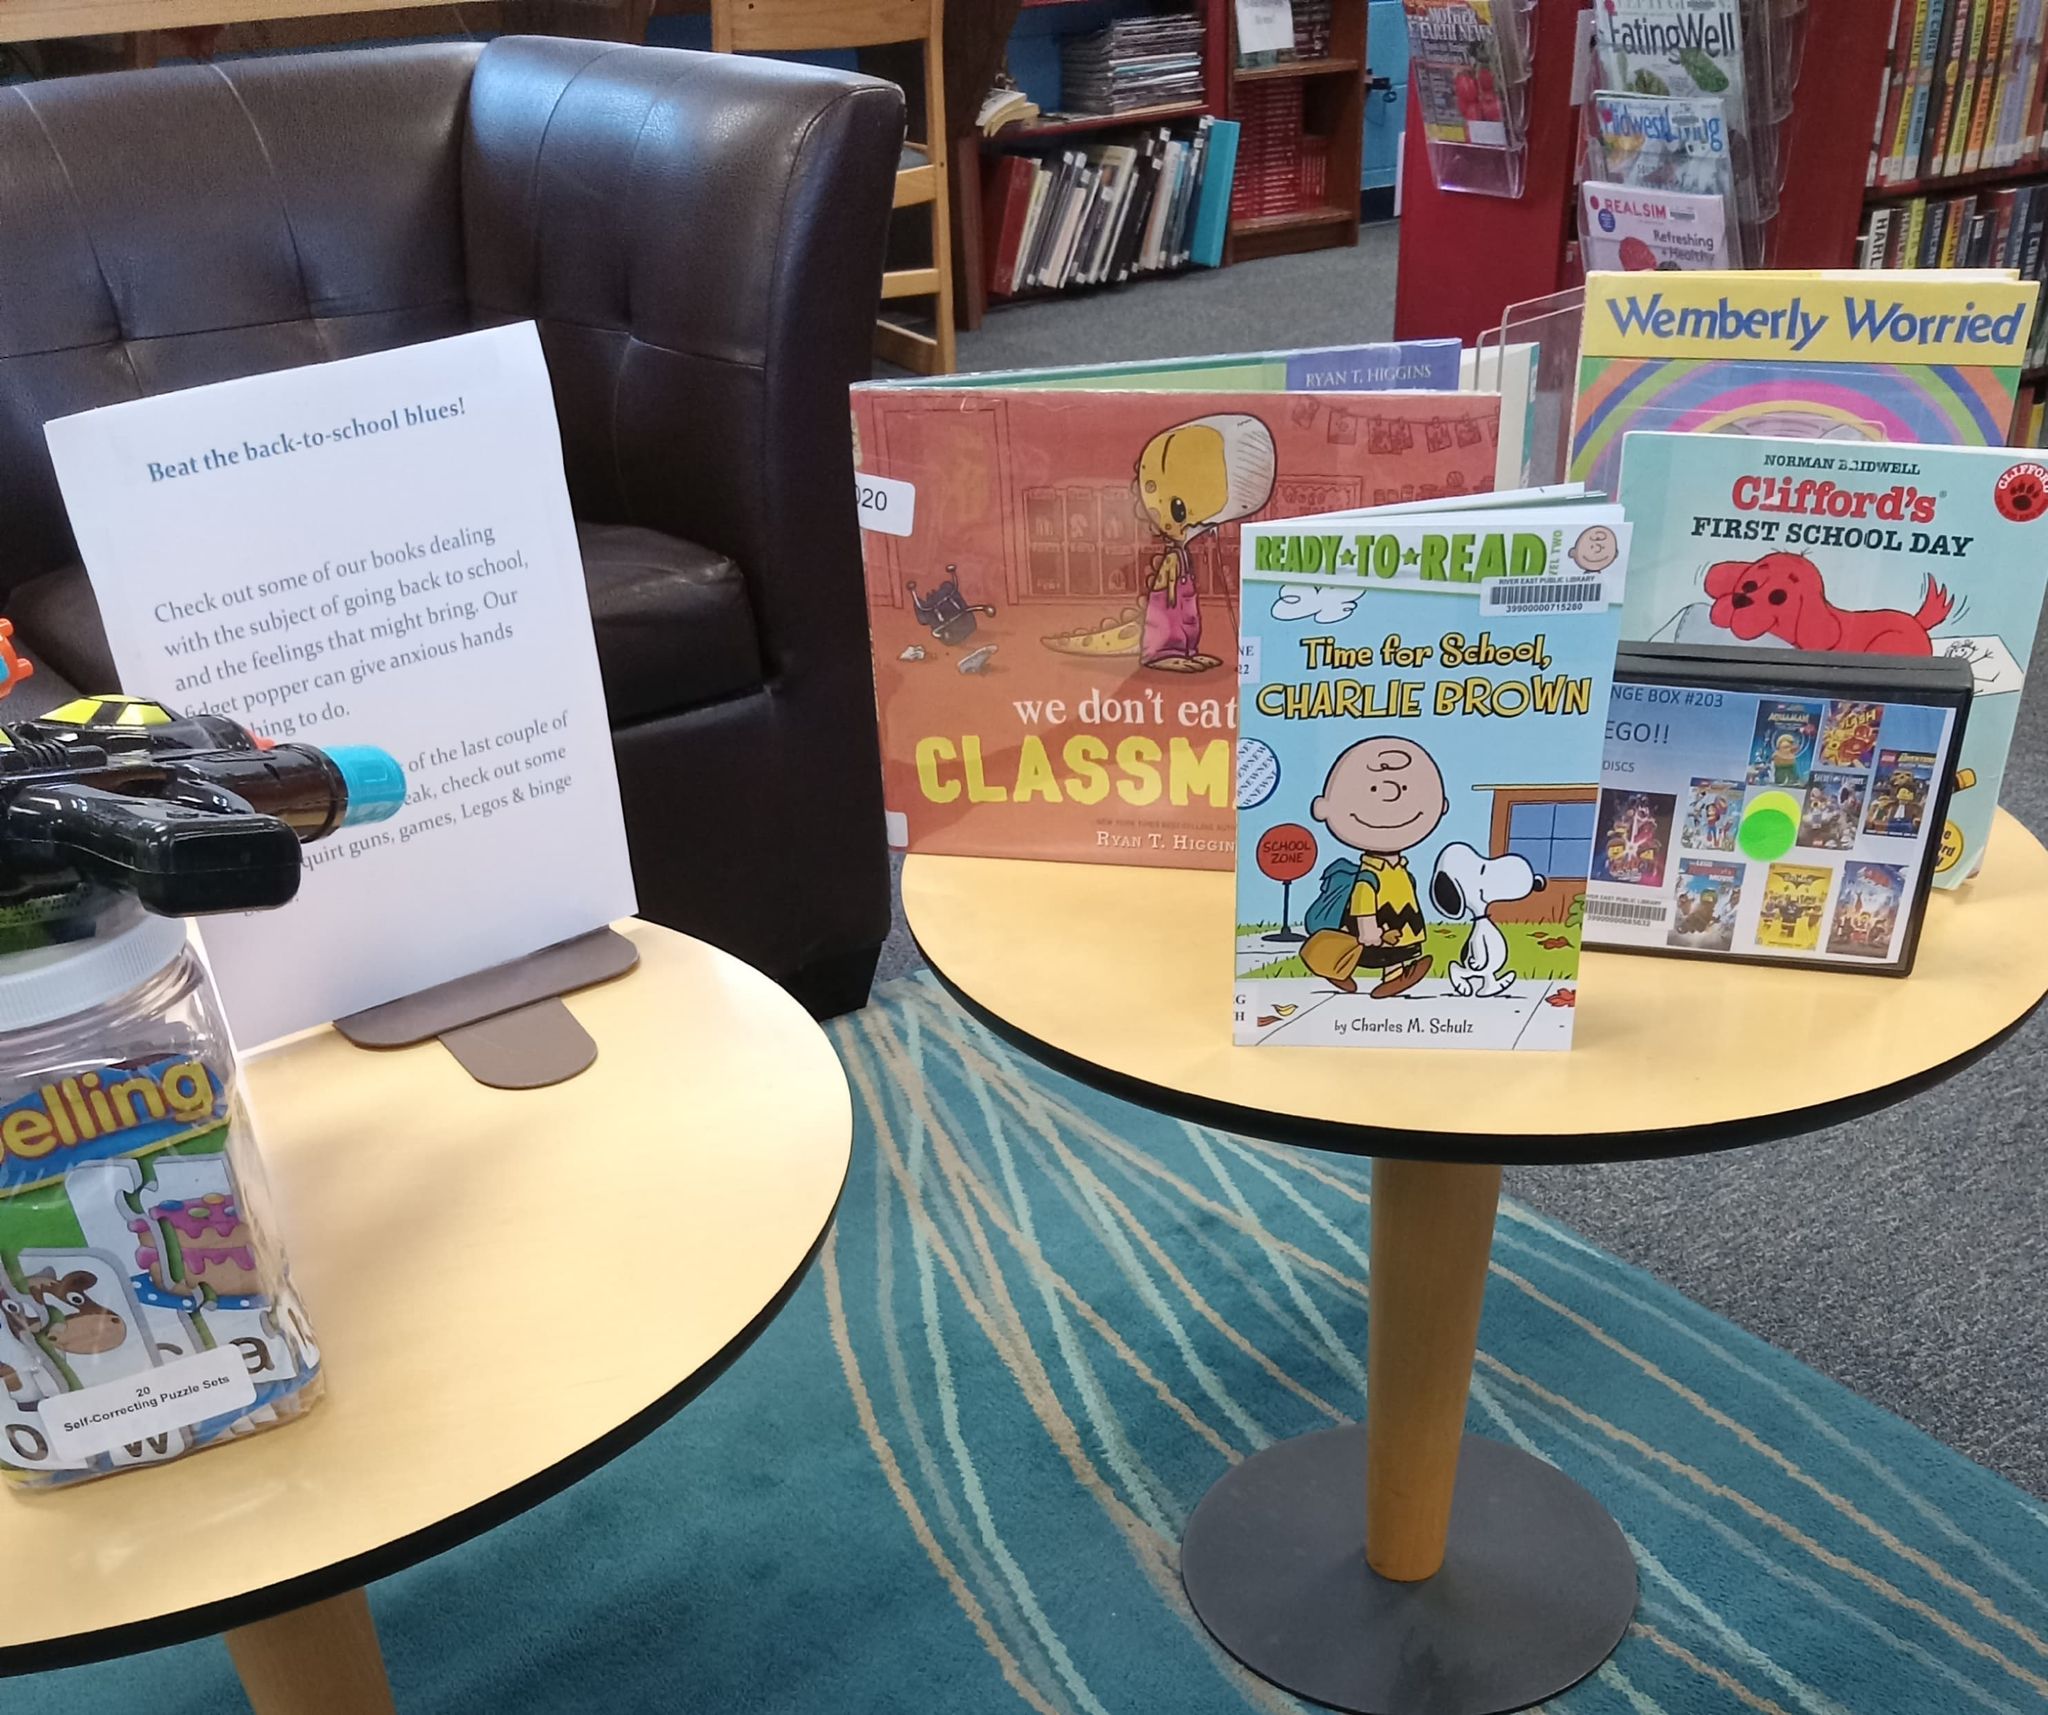 Image showing a display of books about going back to school